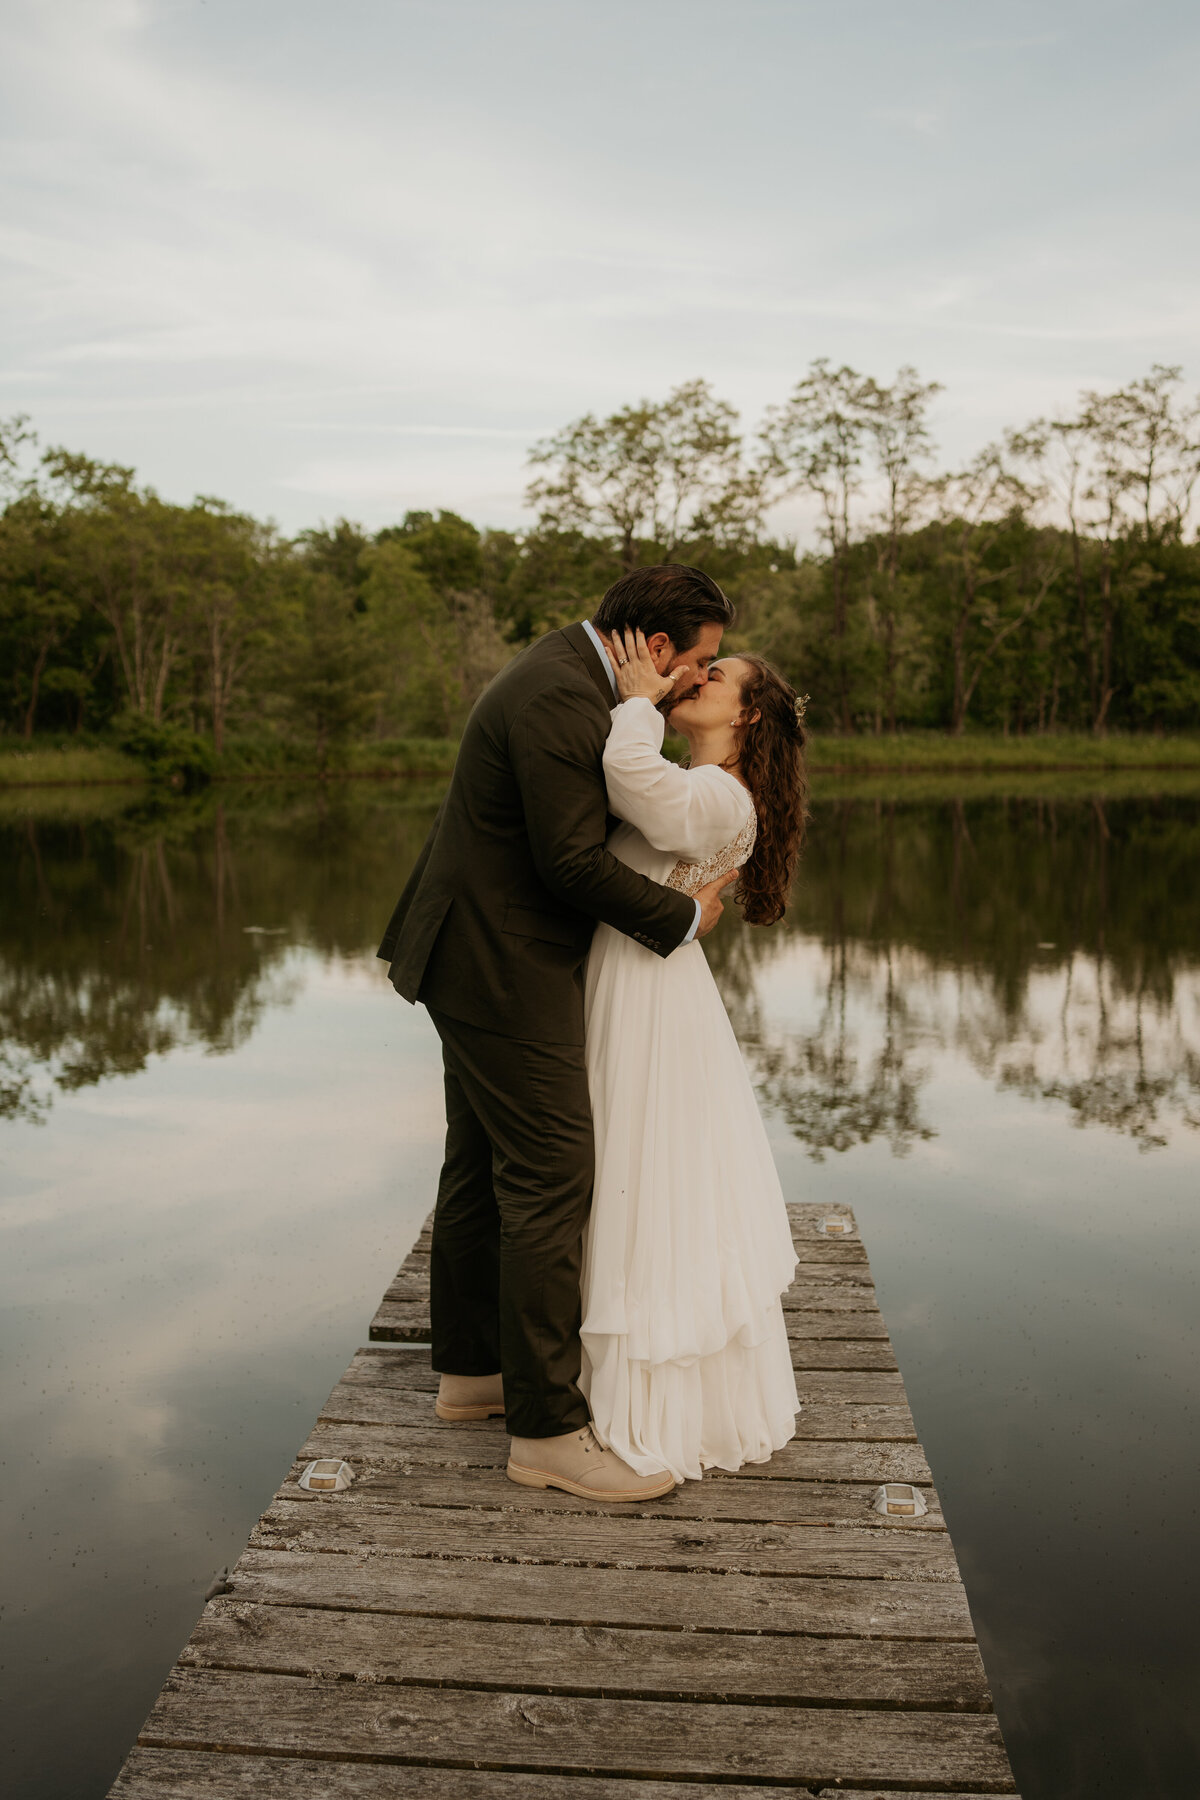 A bride and groom share a romantic kiss on a wooden dock by a serene lake at Blenheim Hill Farm. The bride, wearing a flowing white dress with long sleeves, holds the groom's face gently. The groom, dressed in a dark suit and light-colored shoes, embraces the bride. The tranquil lake and lush green trees in the background are perfectly reflected in the water.